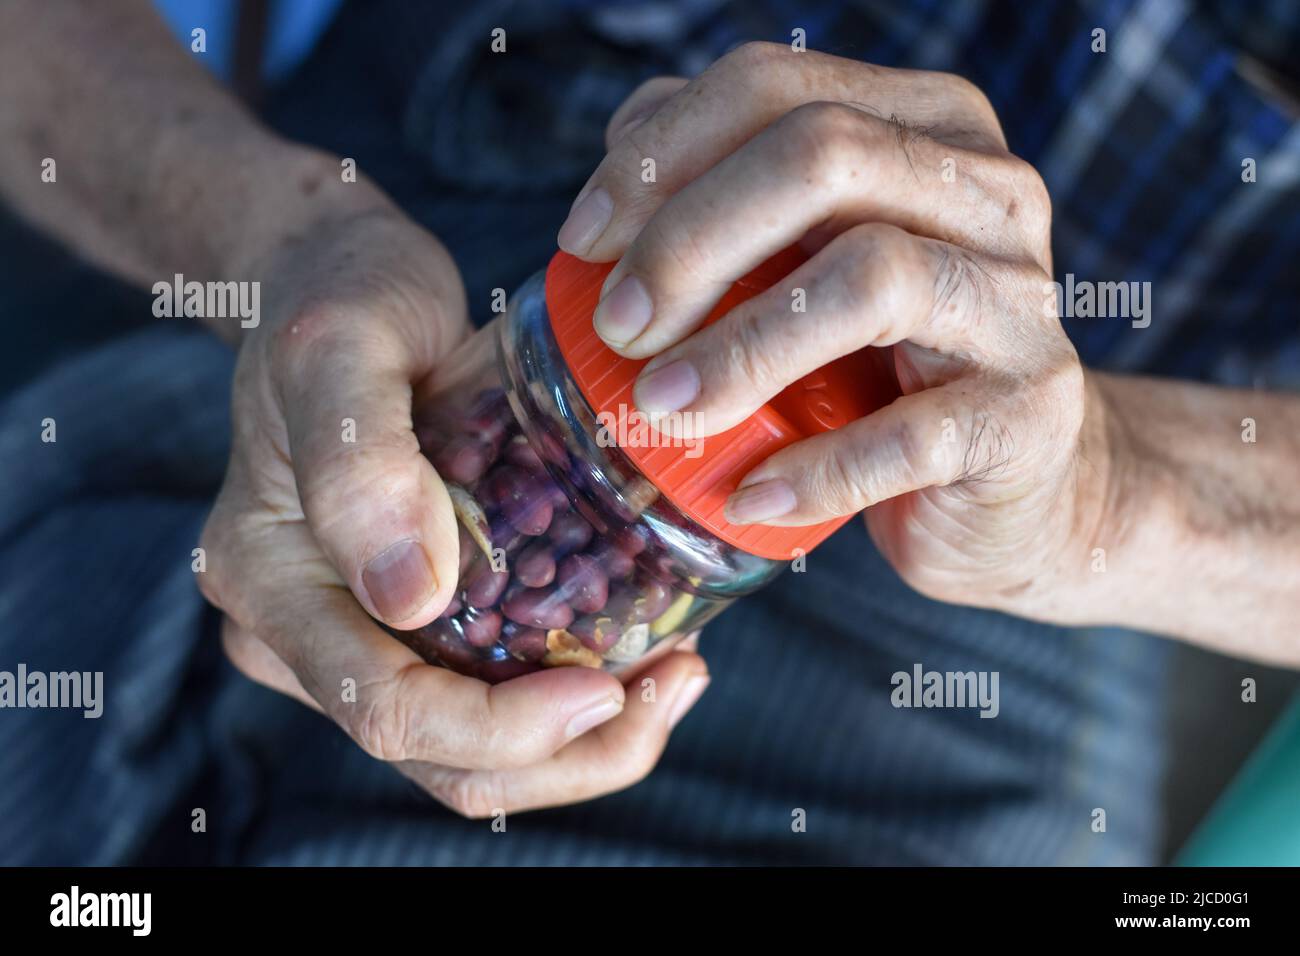 Asian Chinese man screwing the cap of glass bottle. Concept of hand muscle strength and power. Stock Photo